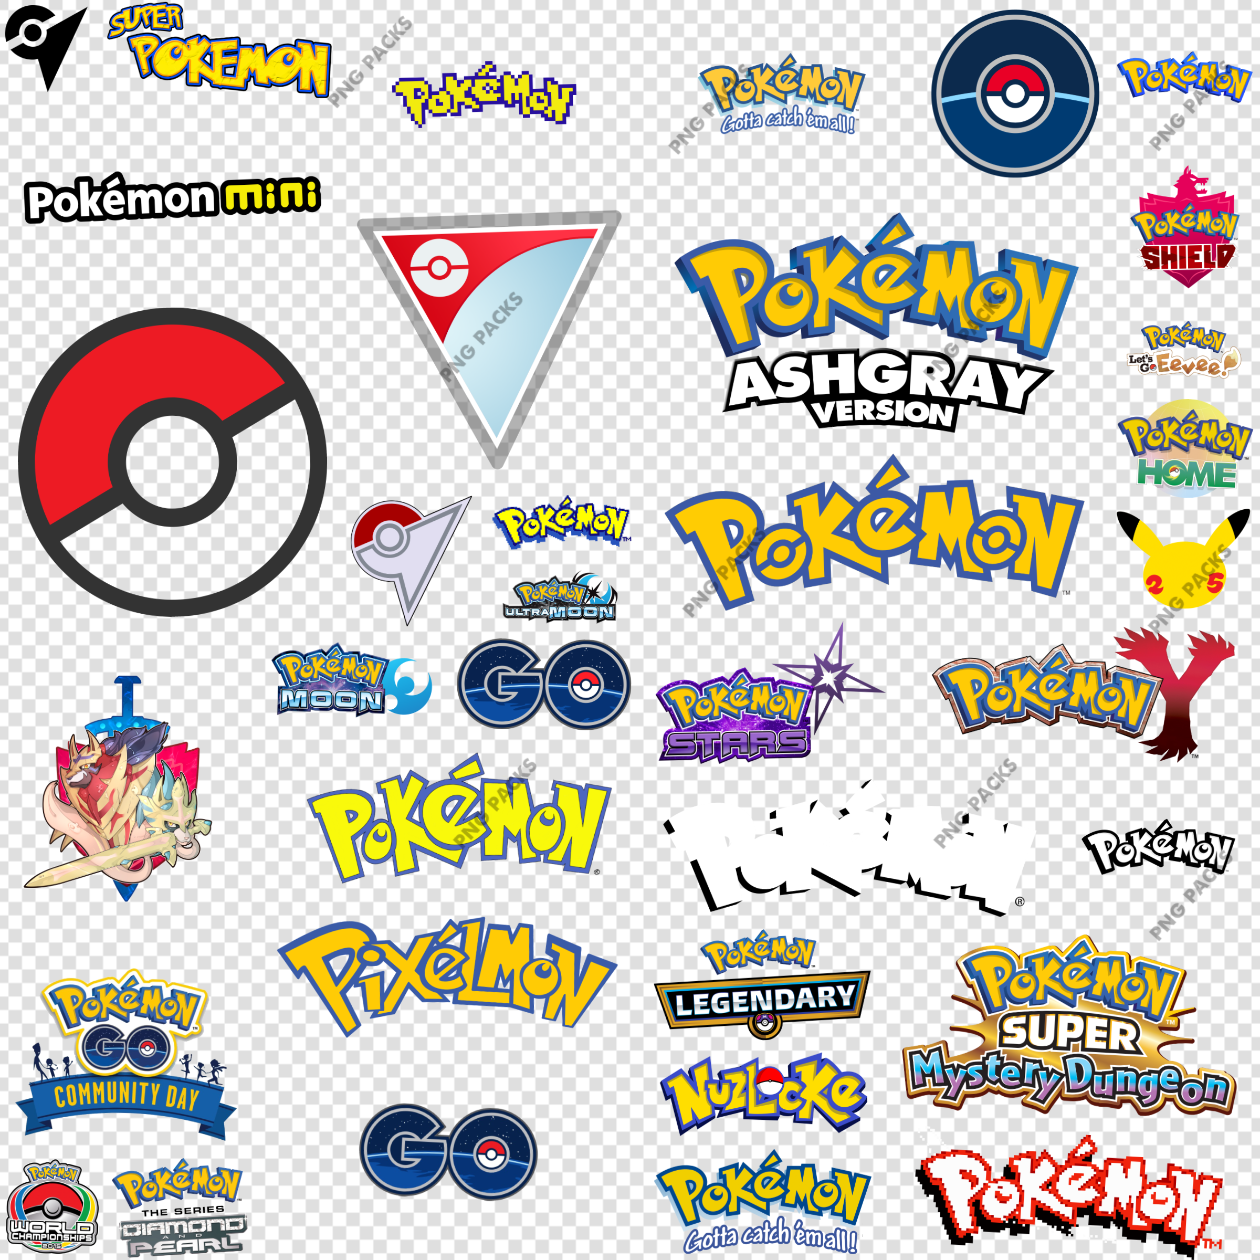 I was thinking yesterday of a Pokemon game with a more mature theme, so I  made some logos. Based off of Shin Megami Tensei. Uses the Pokemon logo  made by u/pipcard. :